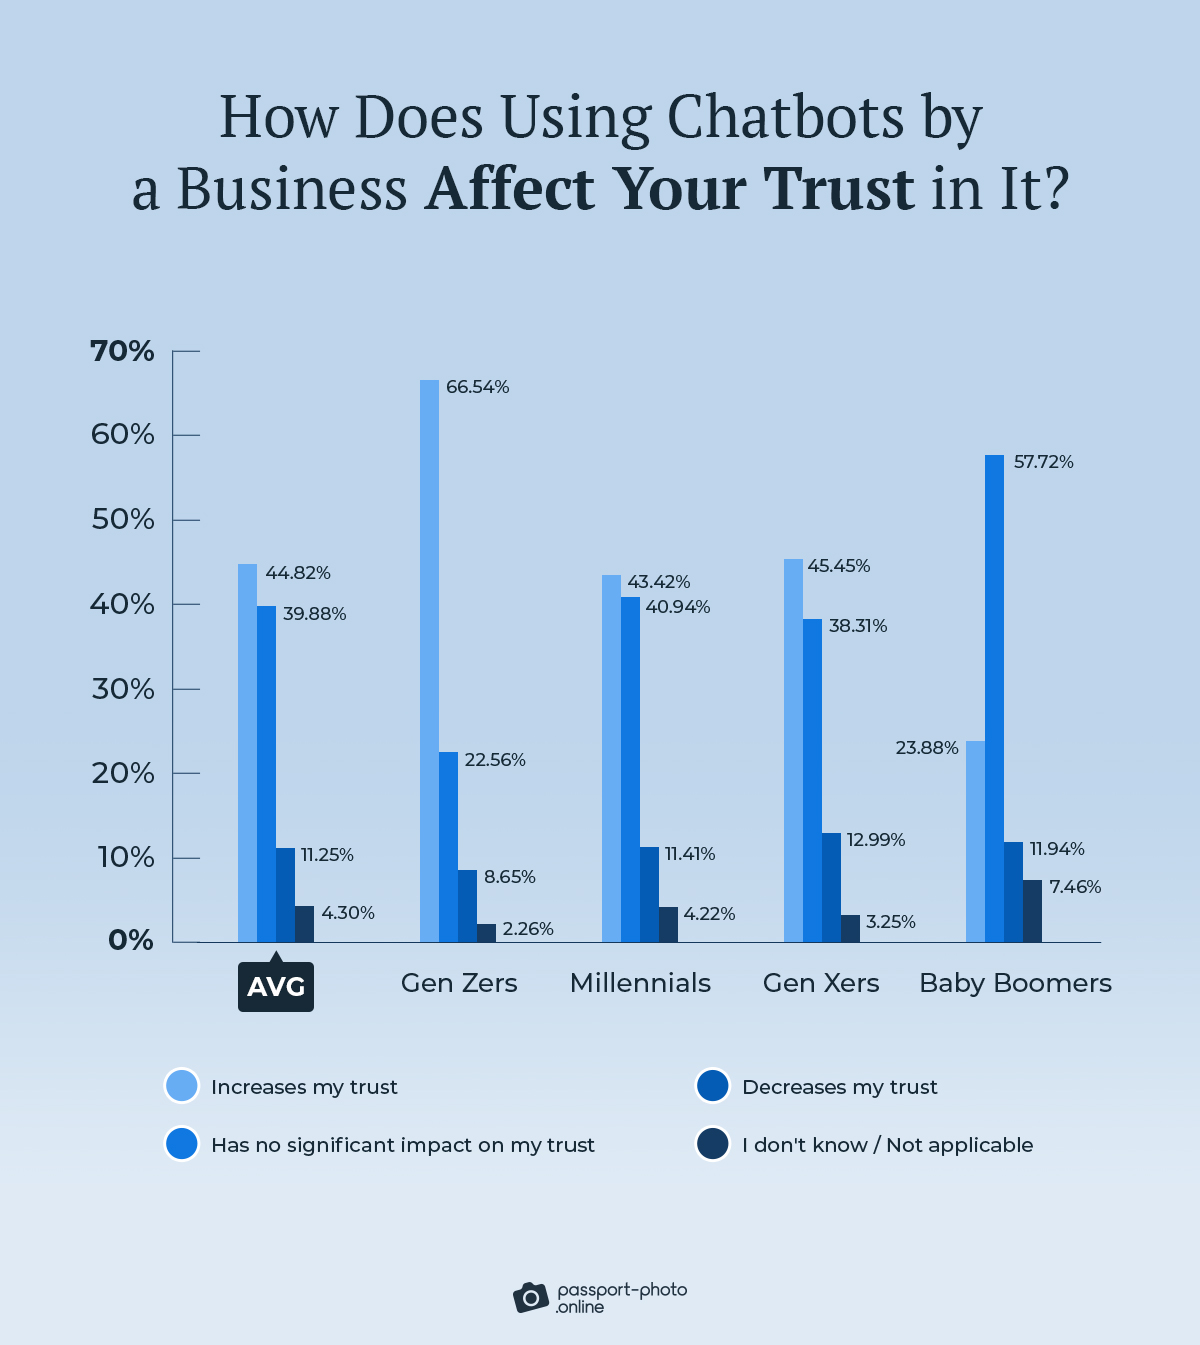 How does using a chatbot by a business affect your trust in it?